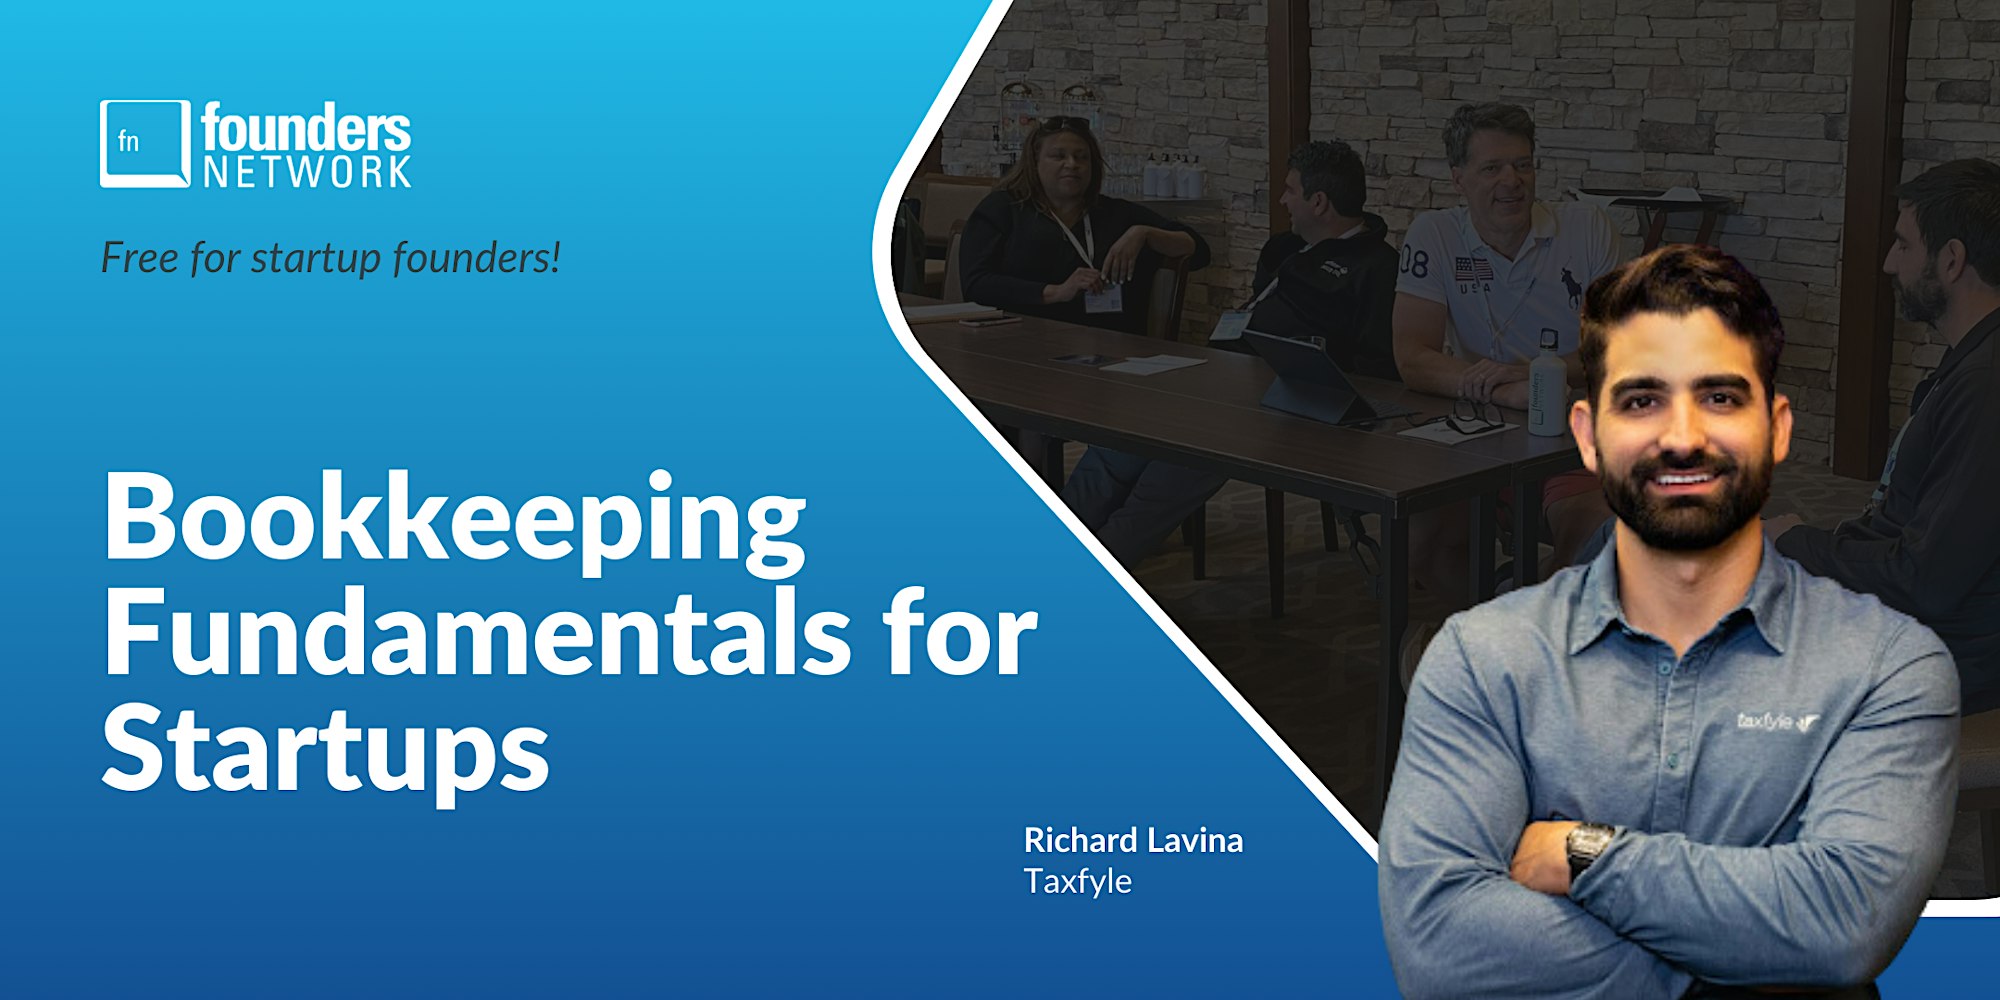 Featured image for “Bookkeeping Fundamentals for Startups with Richard Lavina of Taxfyle”